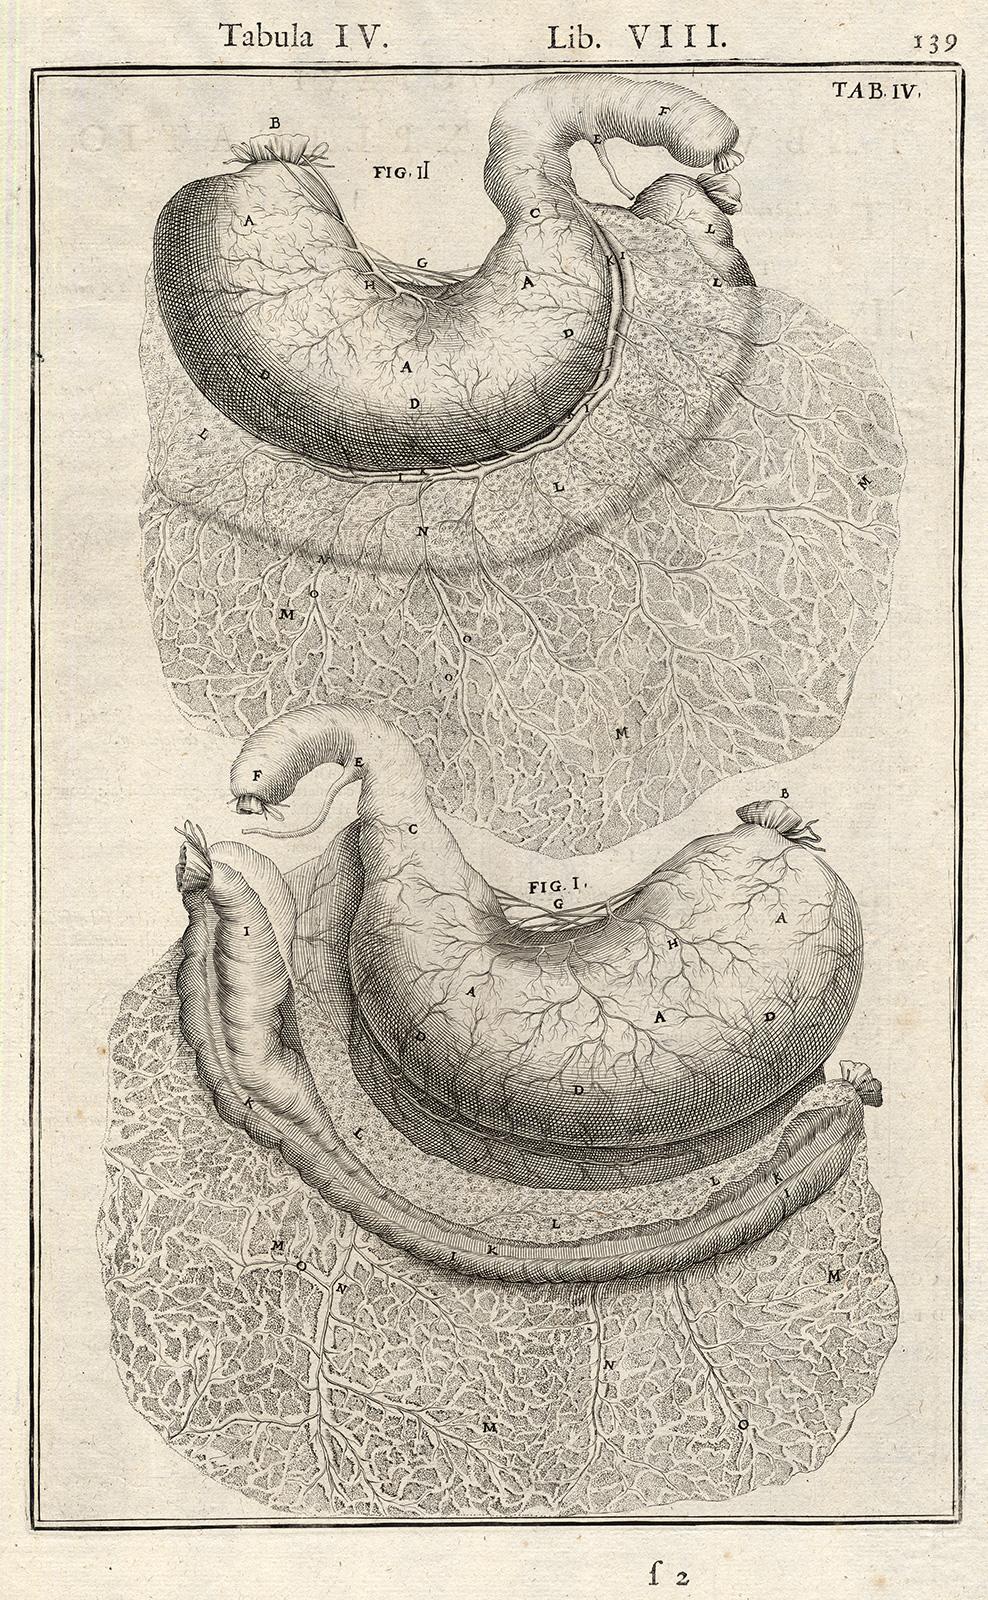 Adrianus Spigelius Print - Anatomical print - stomach and colon - by Spigelius - Engraving - 17th c